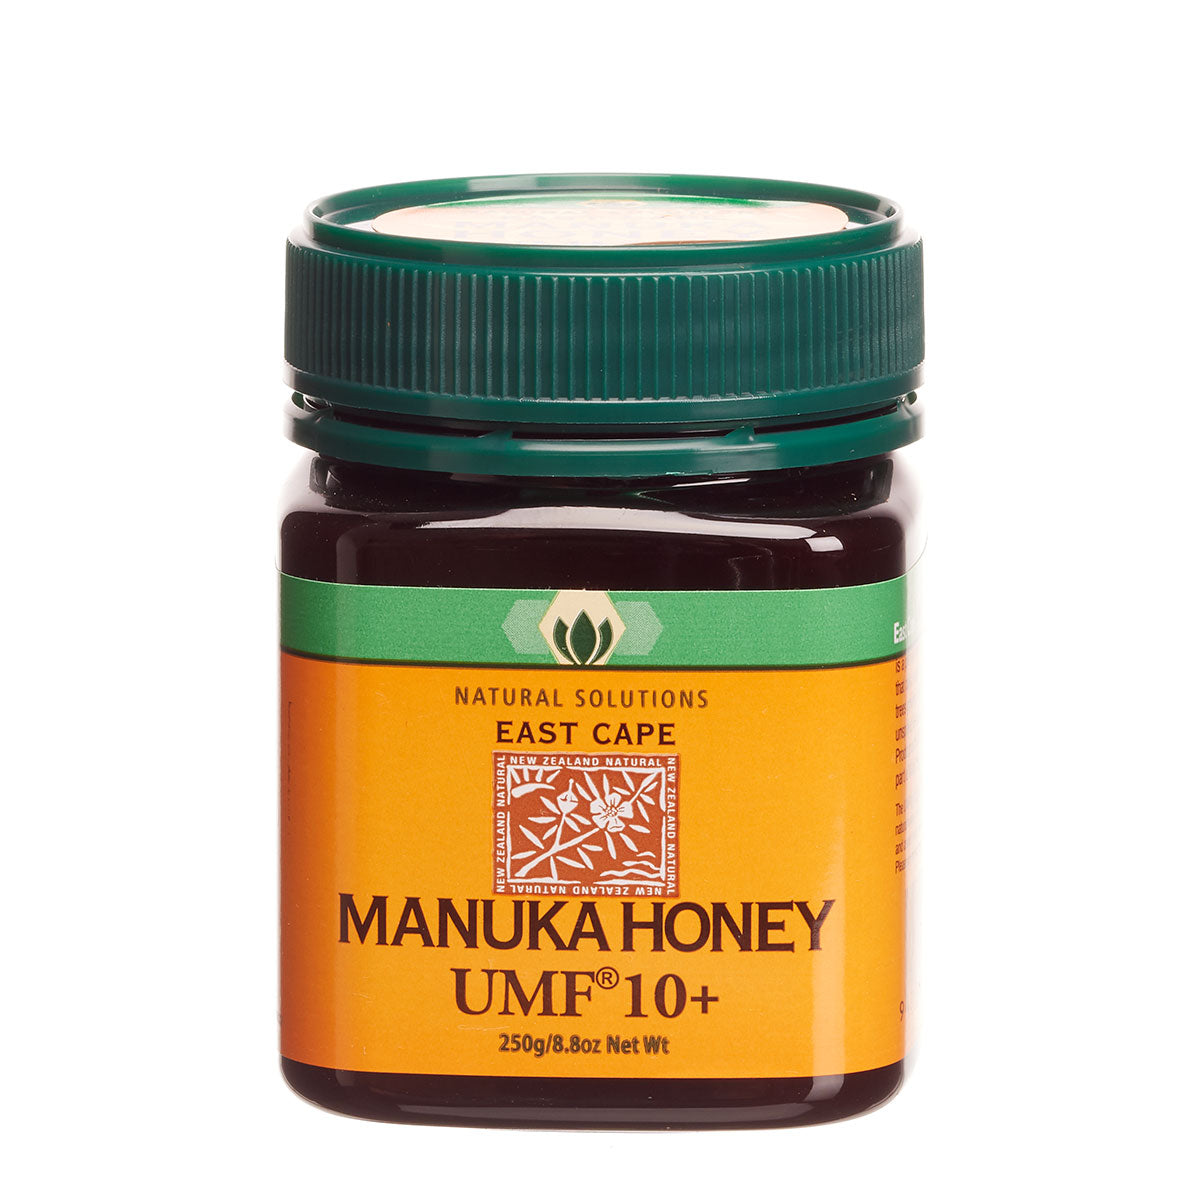 What is the unique manuka factor? What a… UMF?